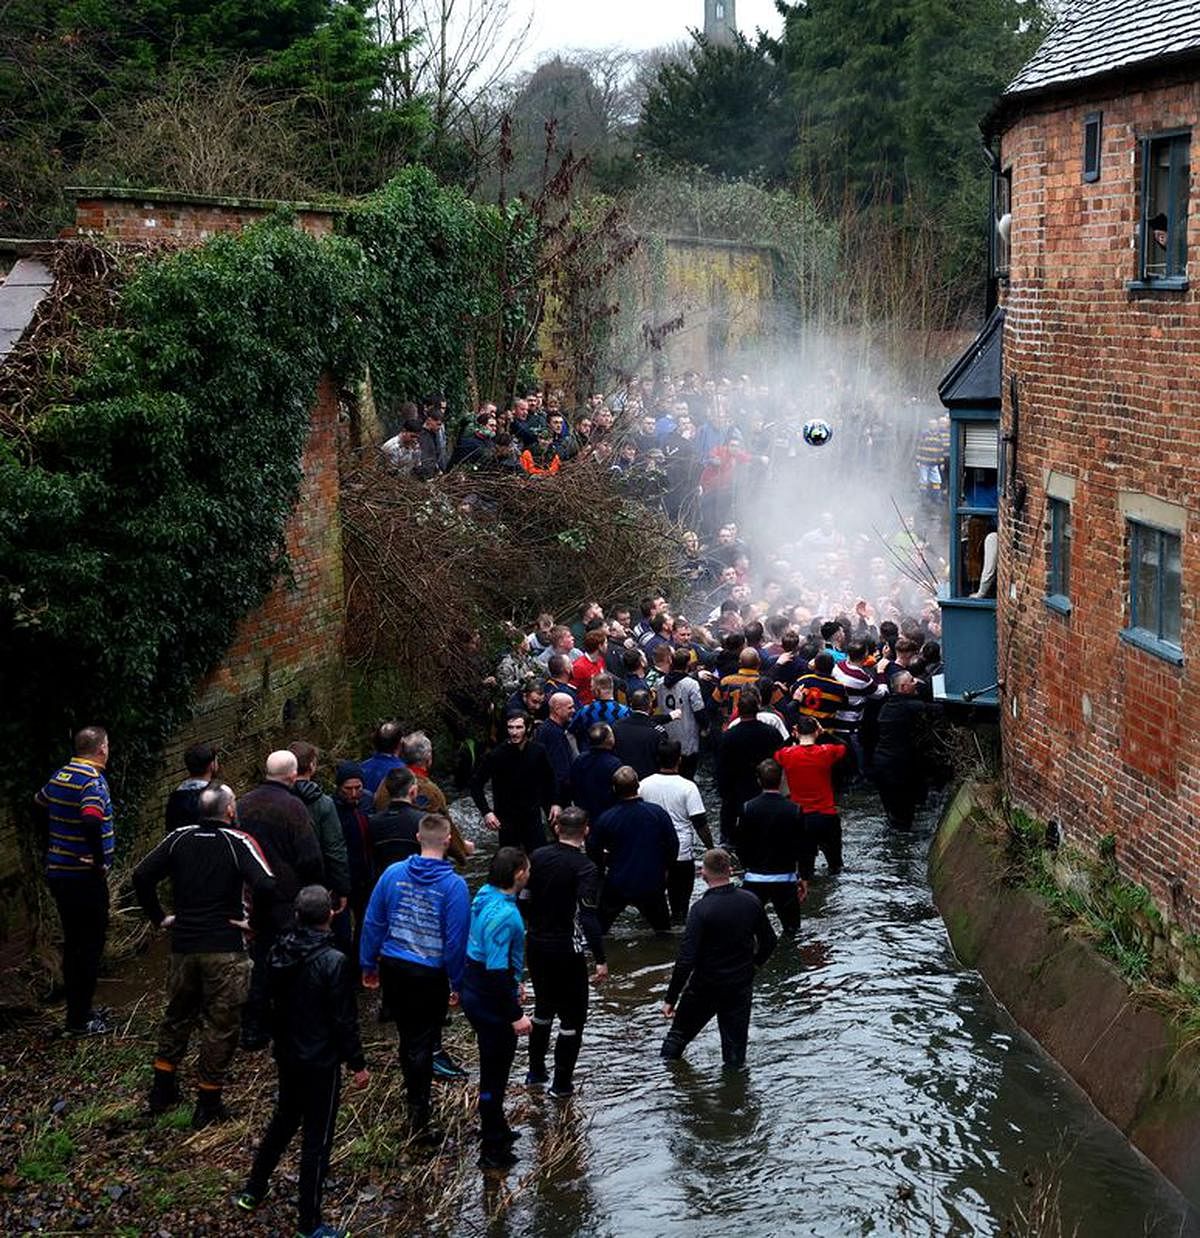 For England's Ashbourne, Shrovetide football is 'in our blood'